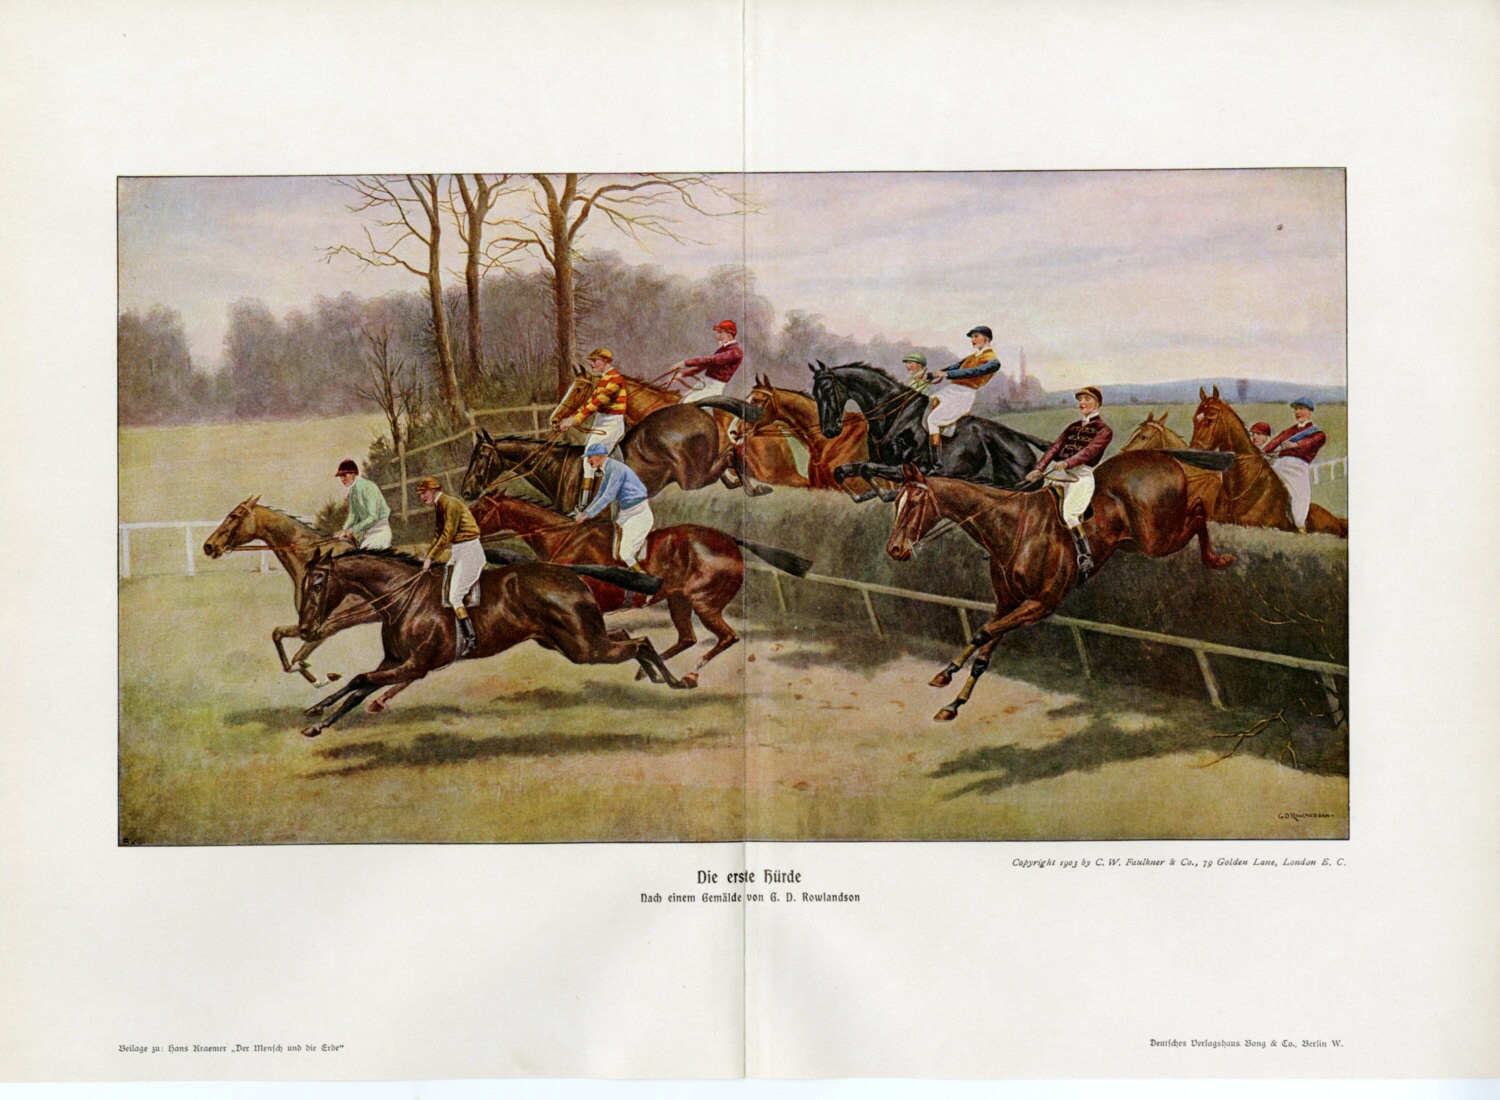 Horse Derby Race Art Print C.1903 The First Hurdle by G.D.